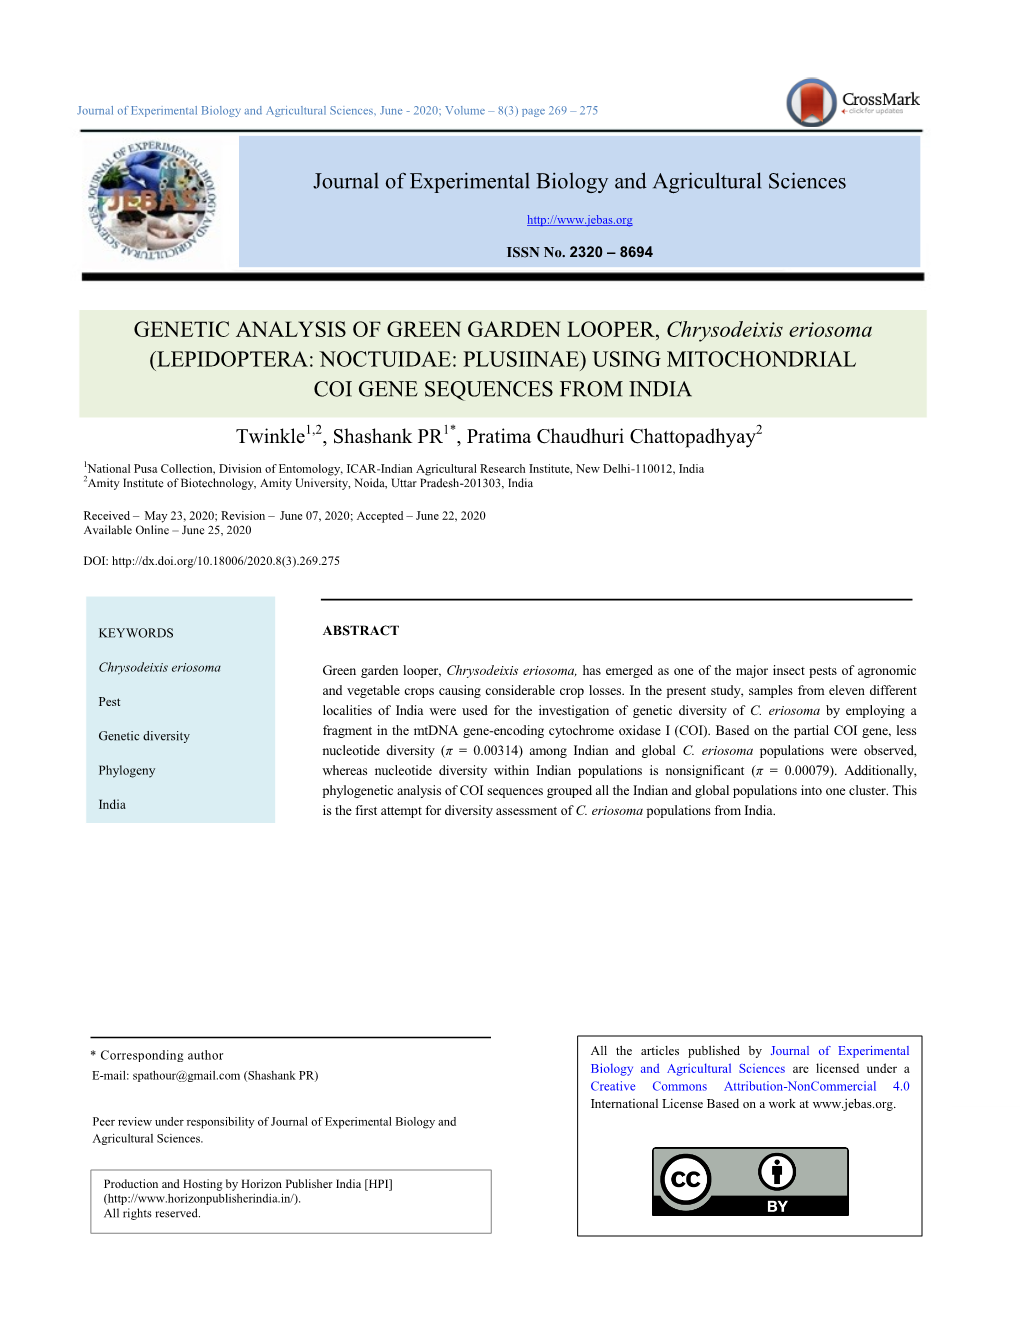 Journal of Experimental Biology and Agricultural Sciences GENETIC